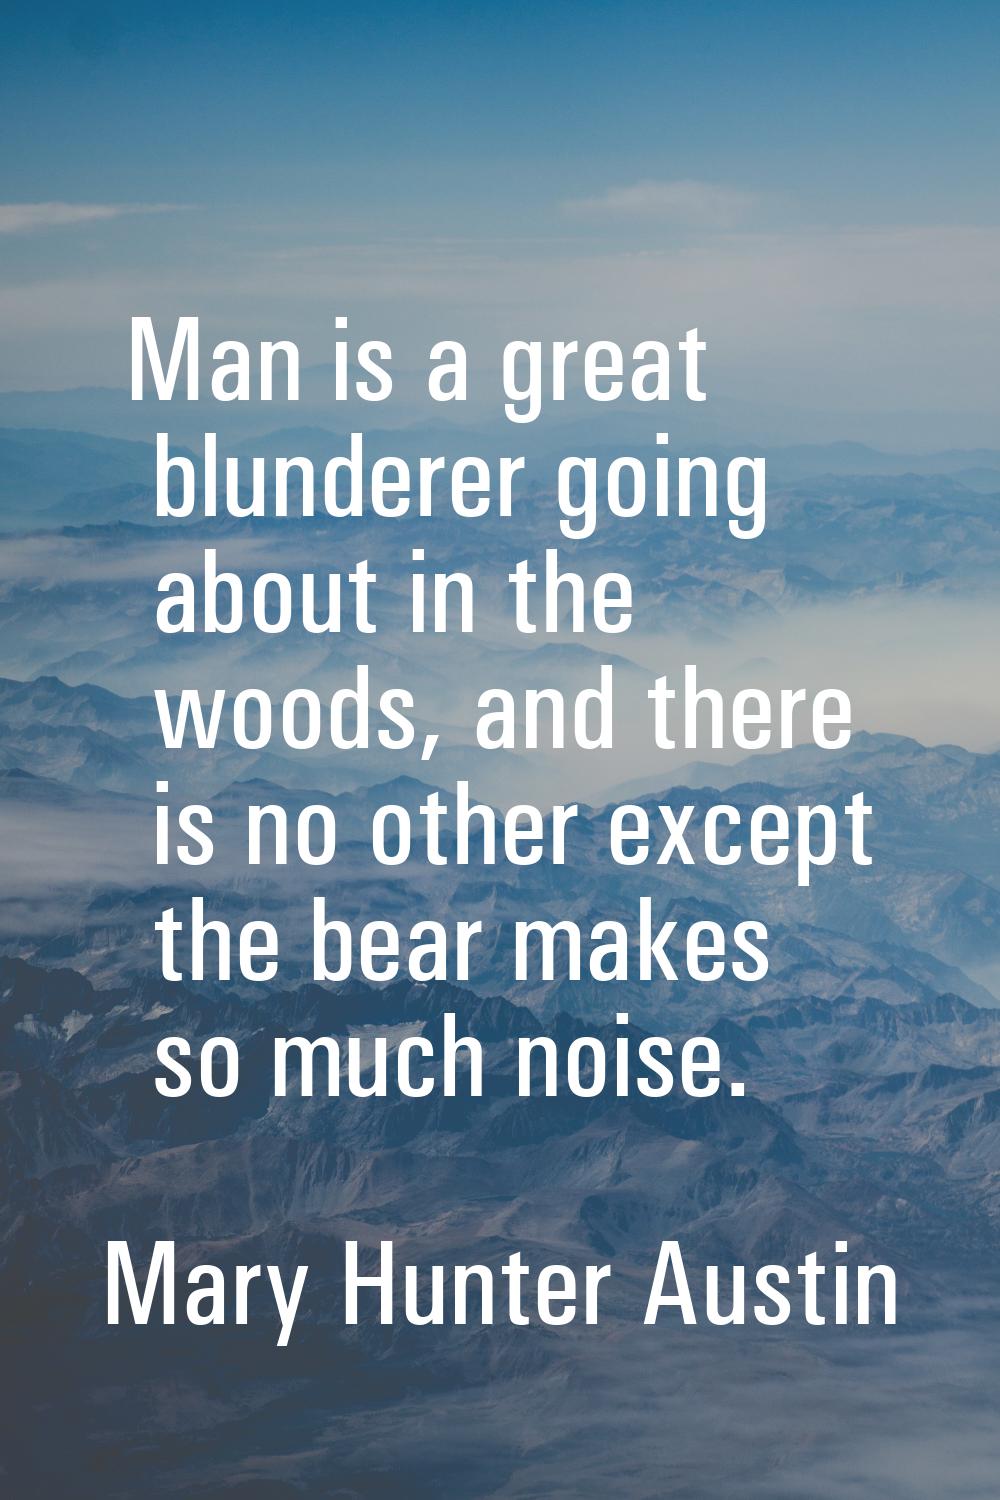 Man is a great blunderer going about in the woods, and there is no other except the bear makes so m